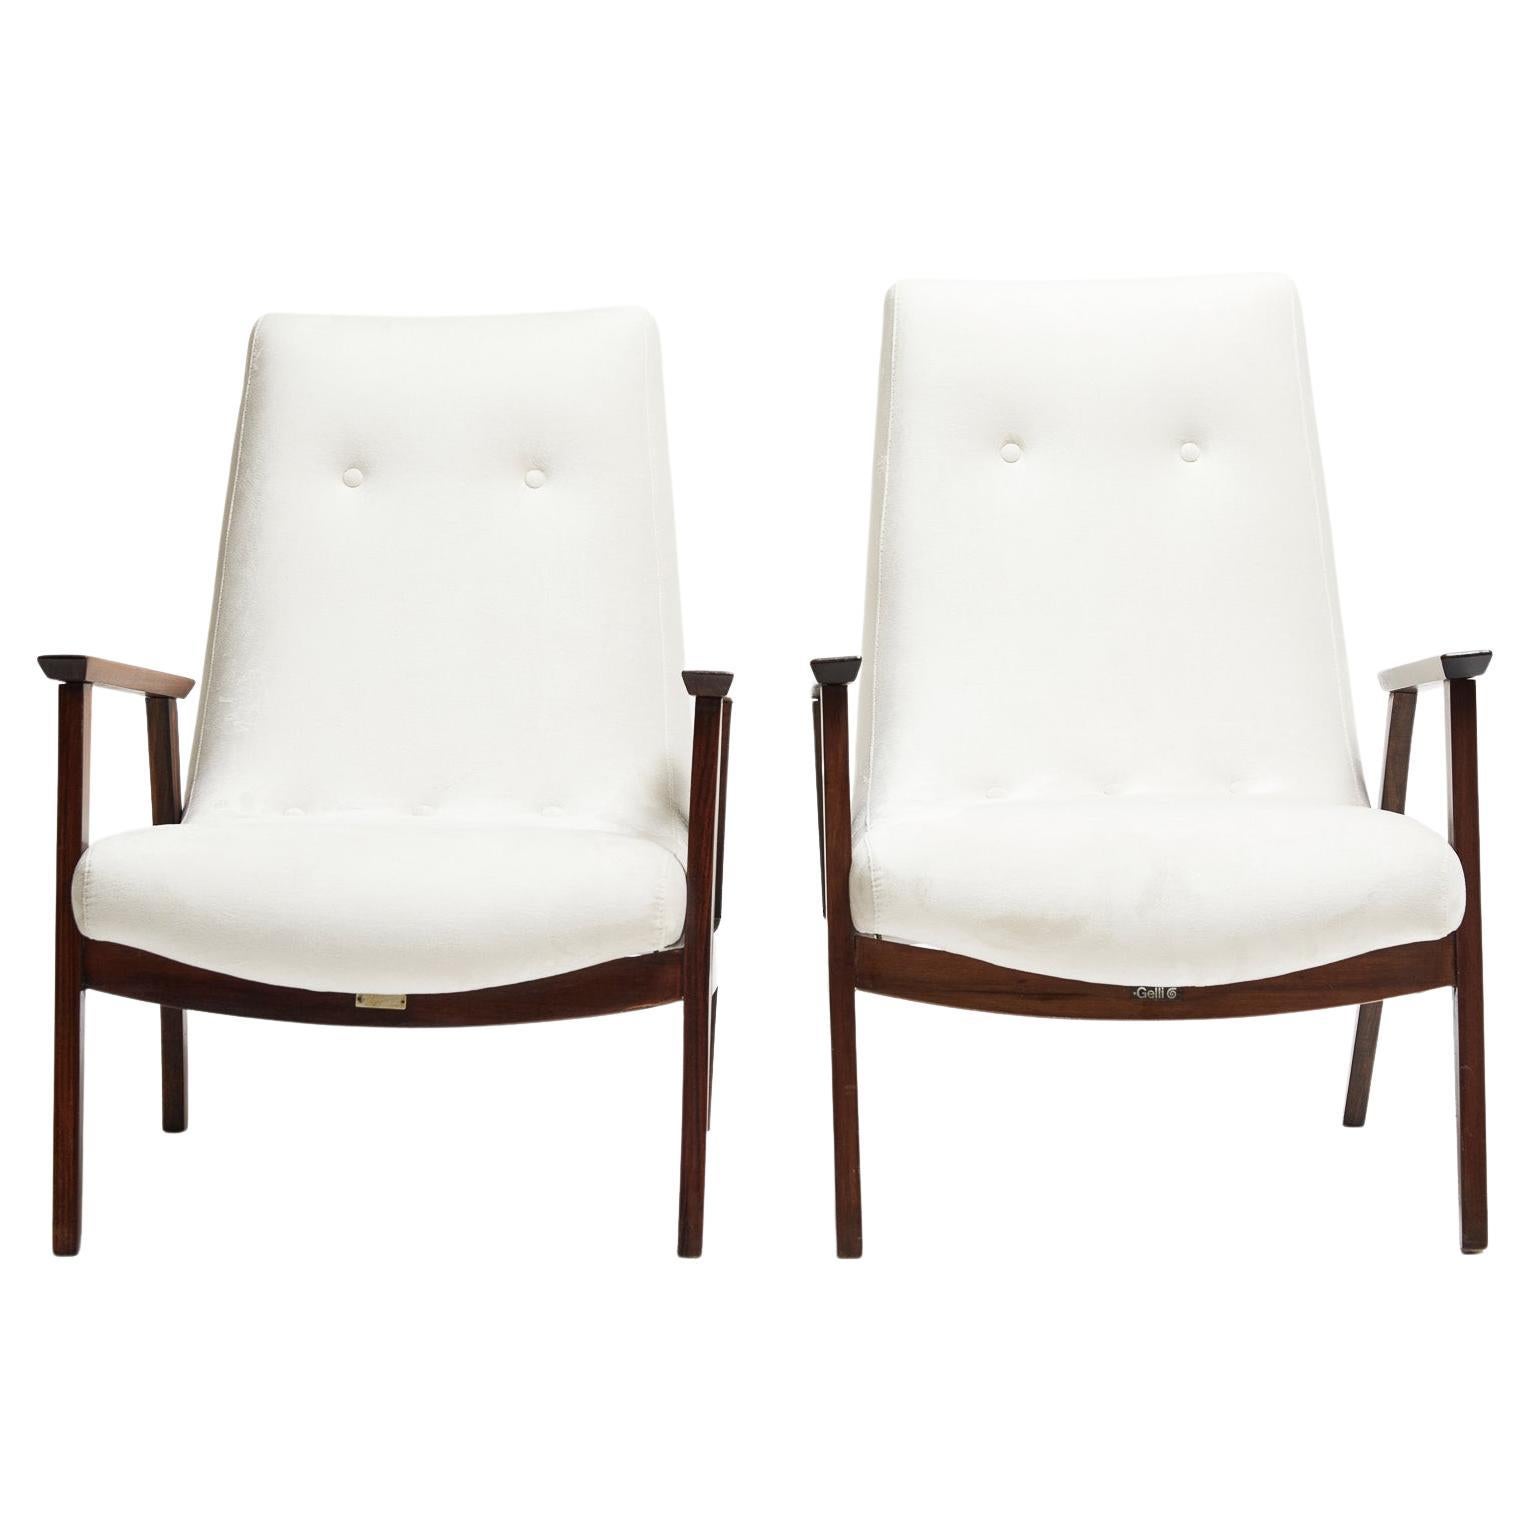 Mid-Century Modern Armchairs in Hardwood & White Suede by Gelli, ci 1960, Brazil For Sale